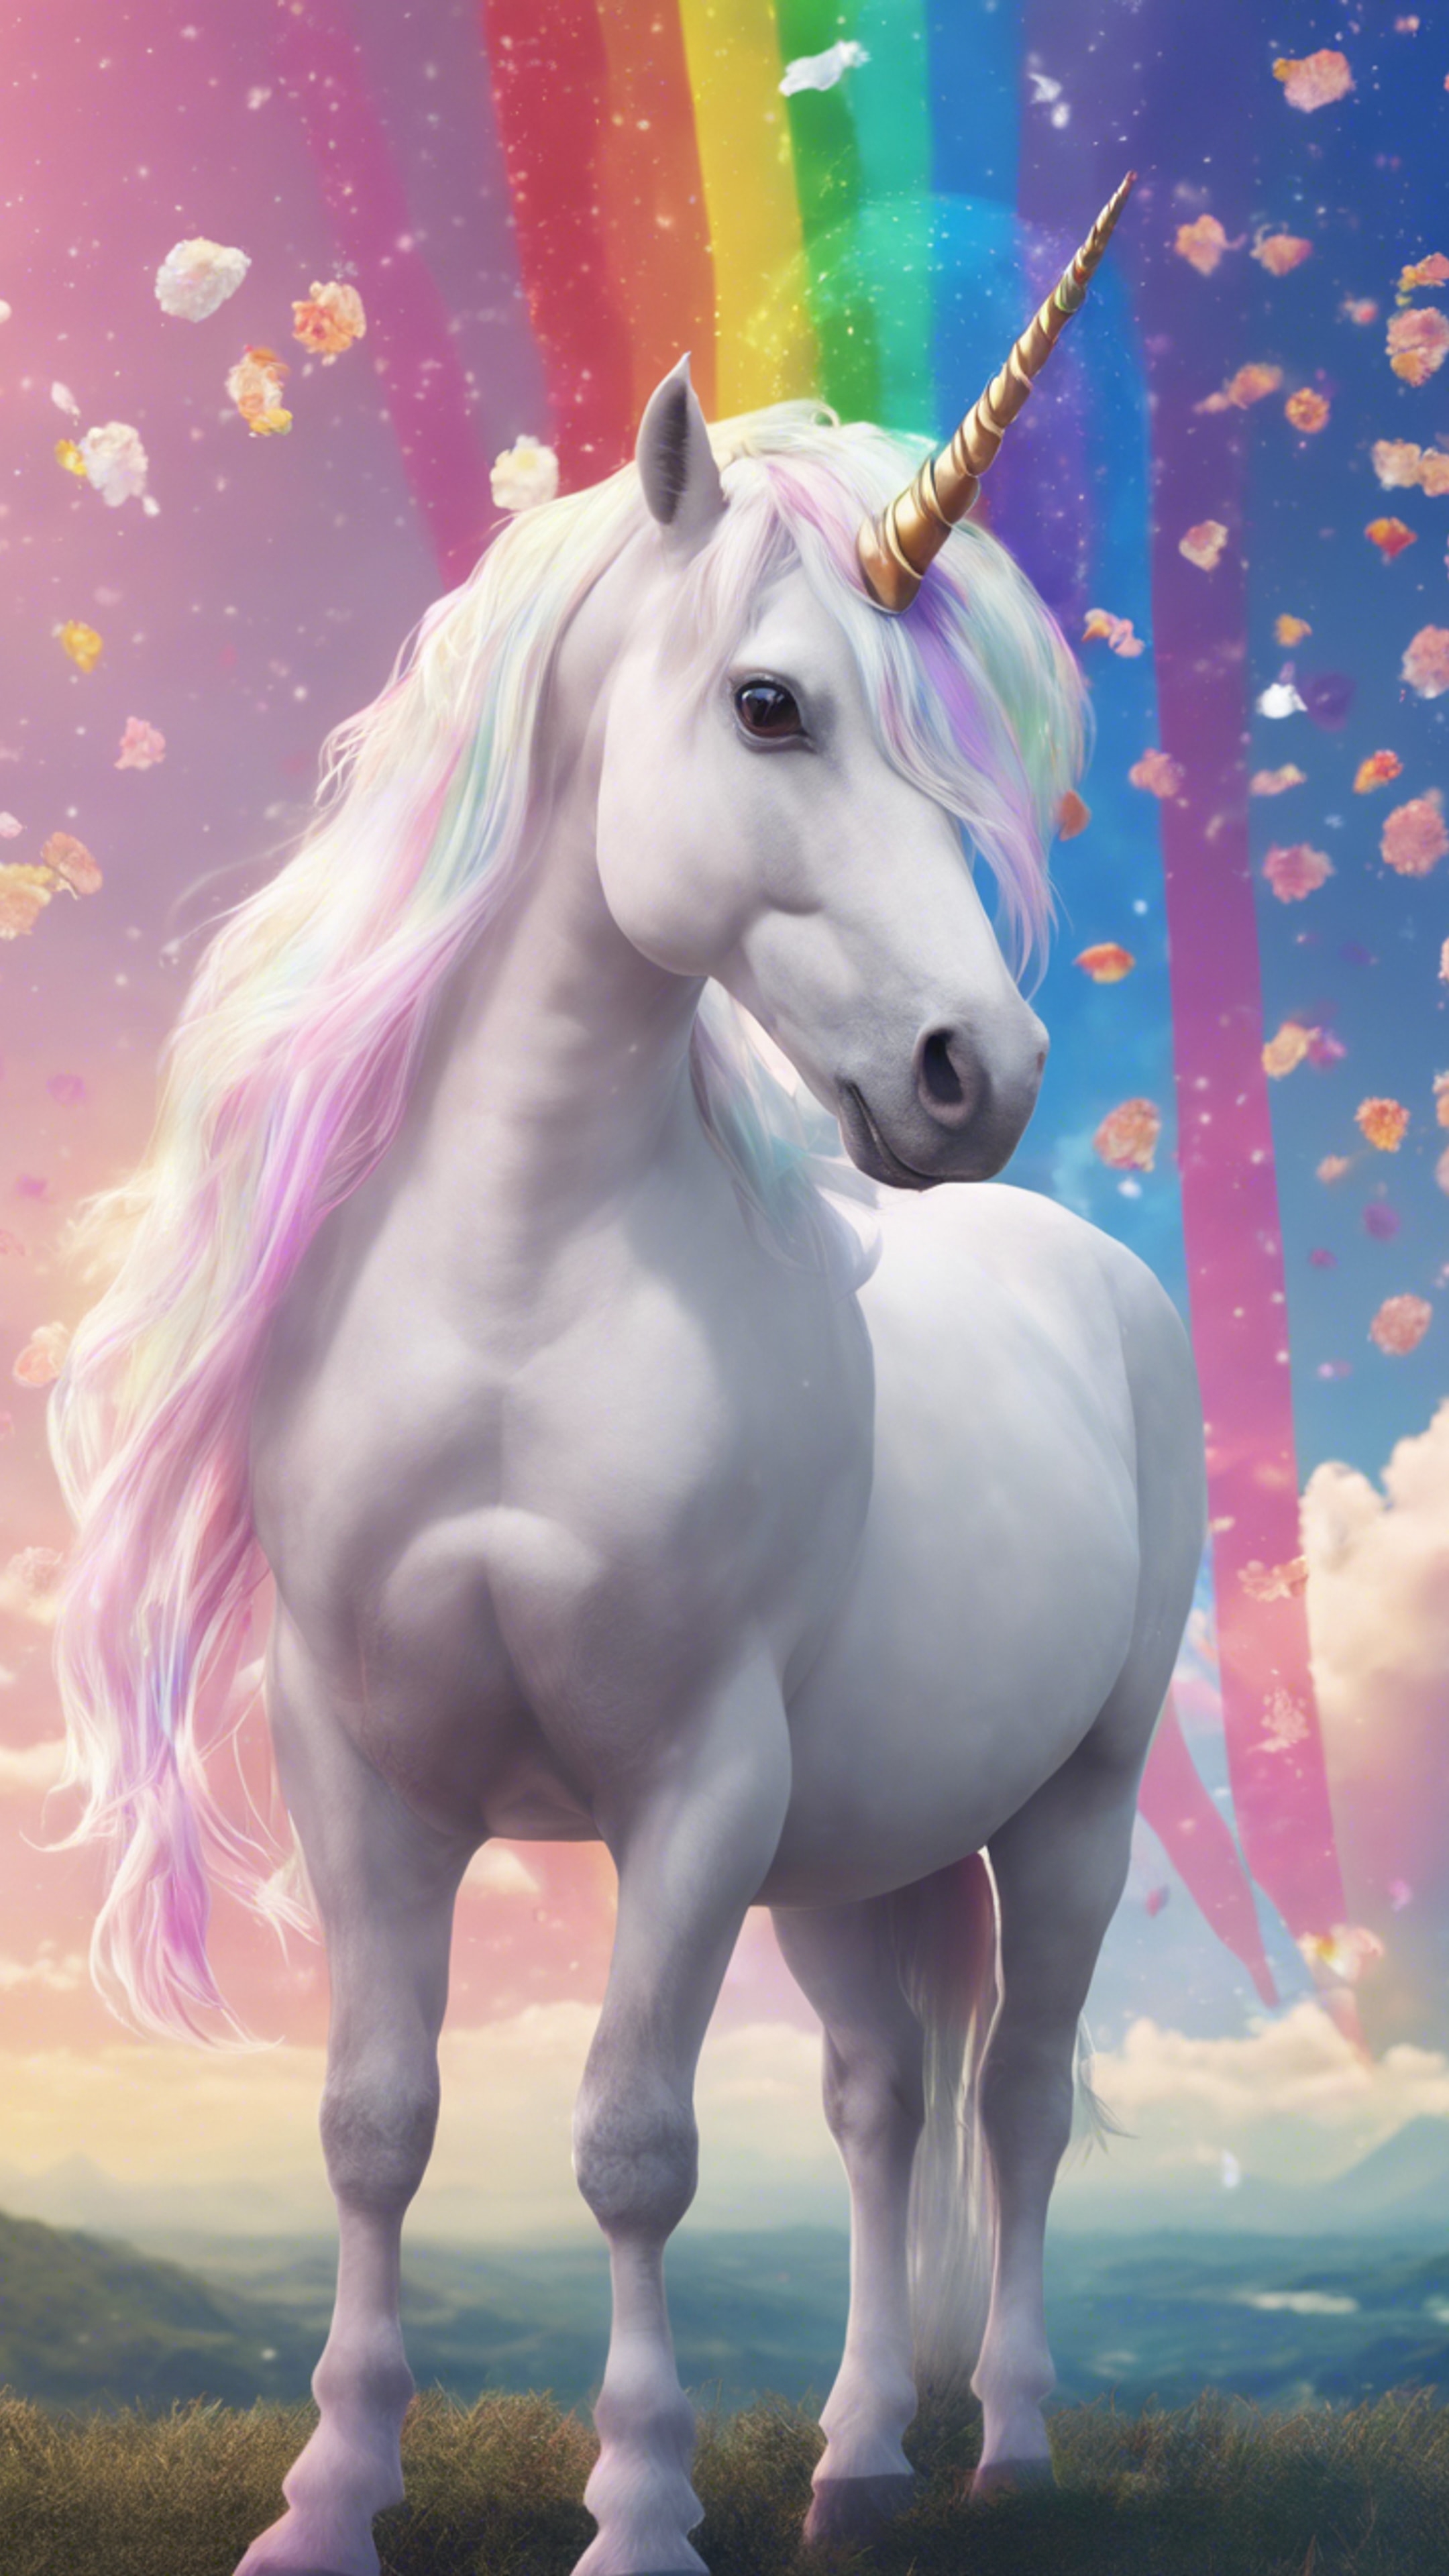 A white unicorn with rainbow-colored mane in a kawaii styled anime background. Ფონი[3fcd035c52a54abd9a77]